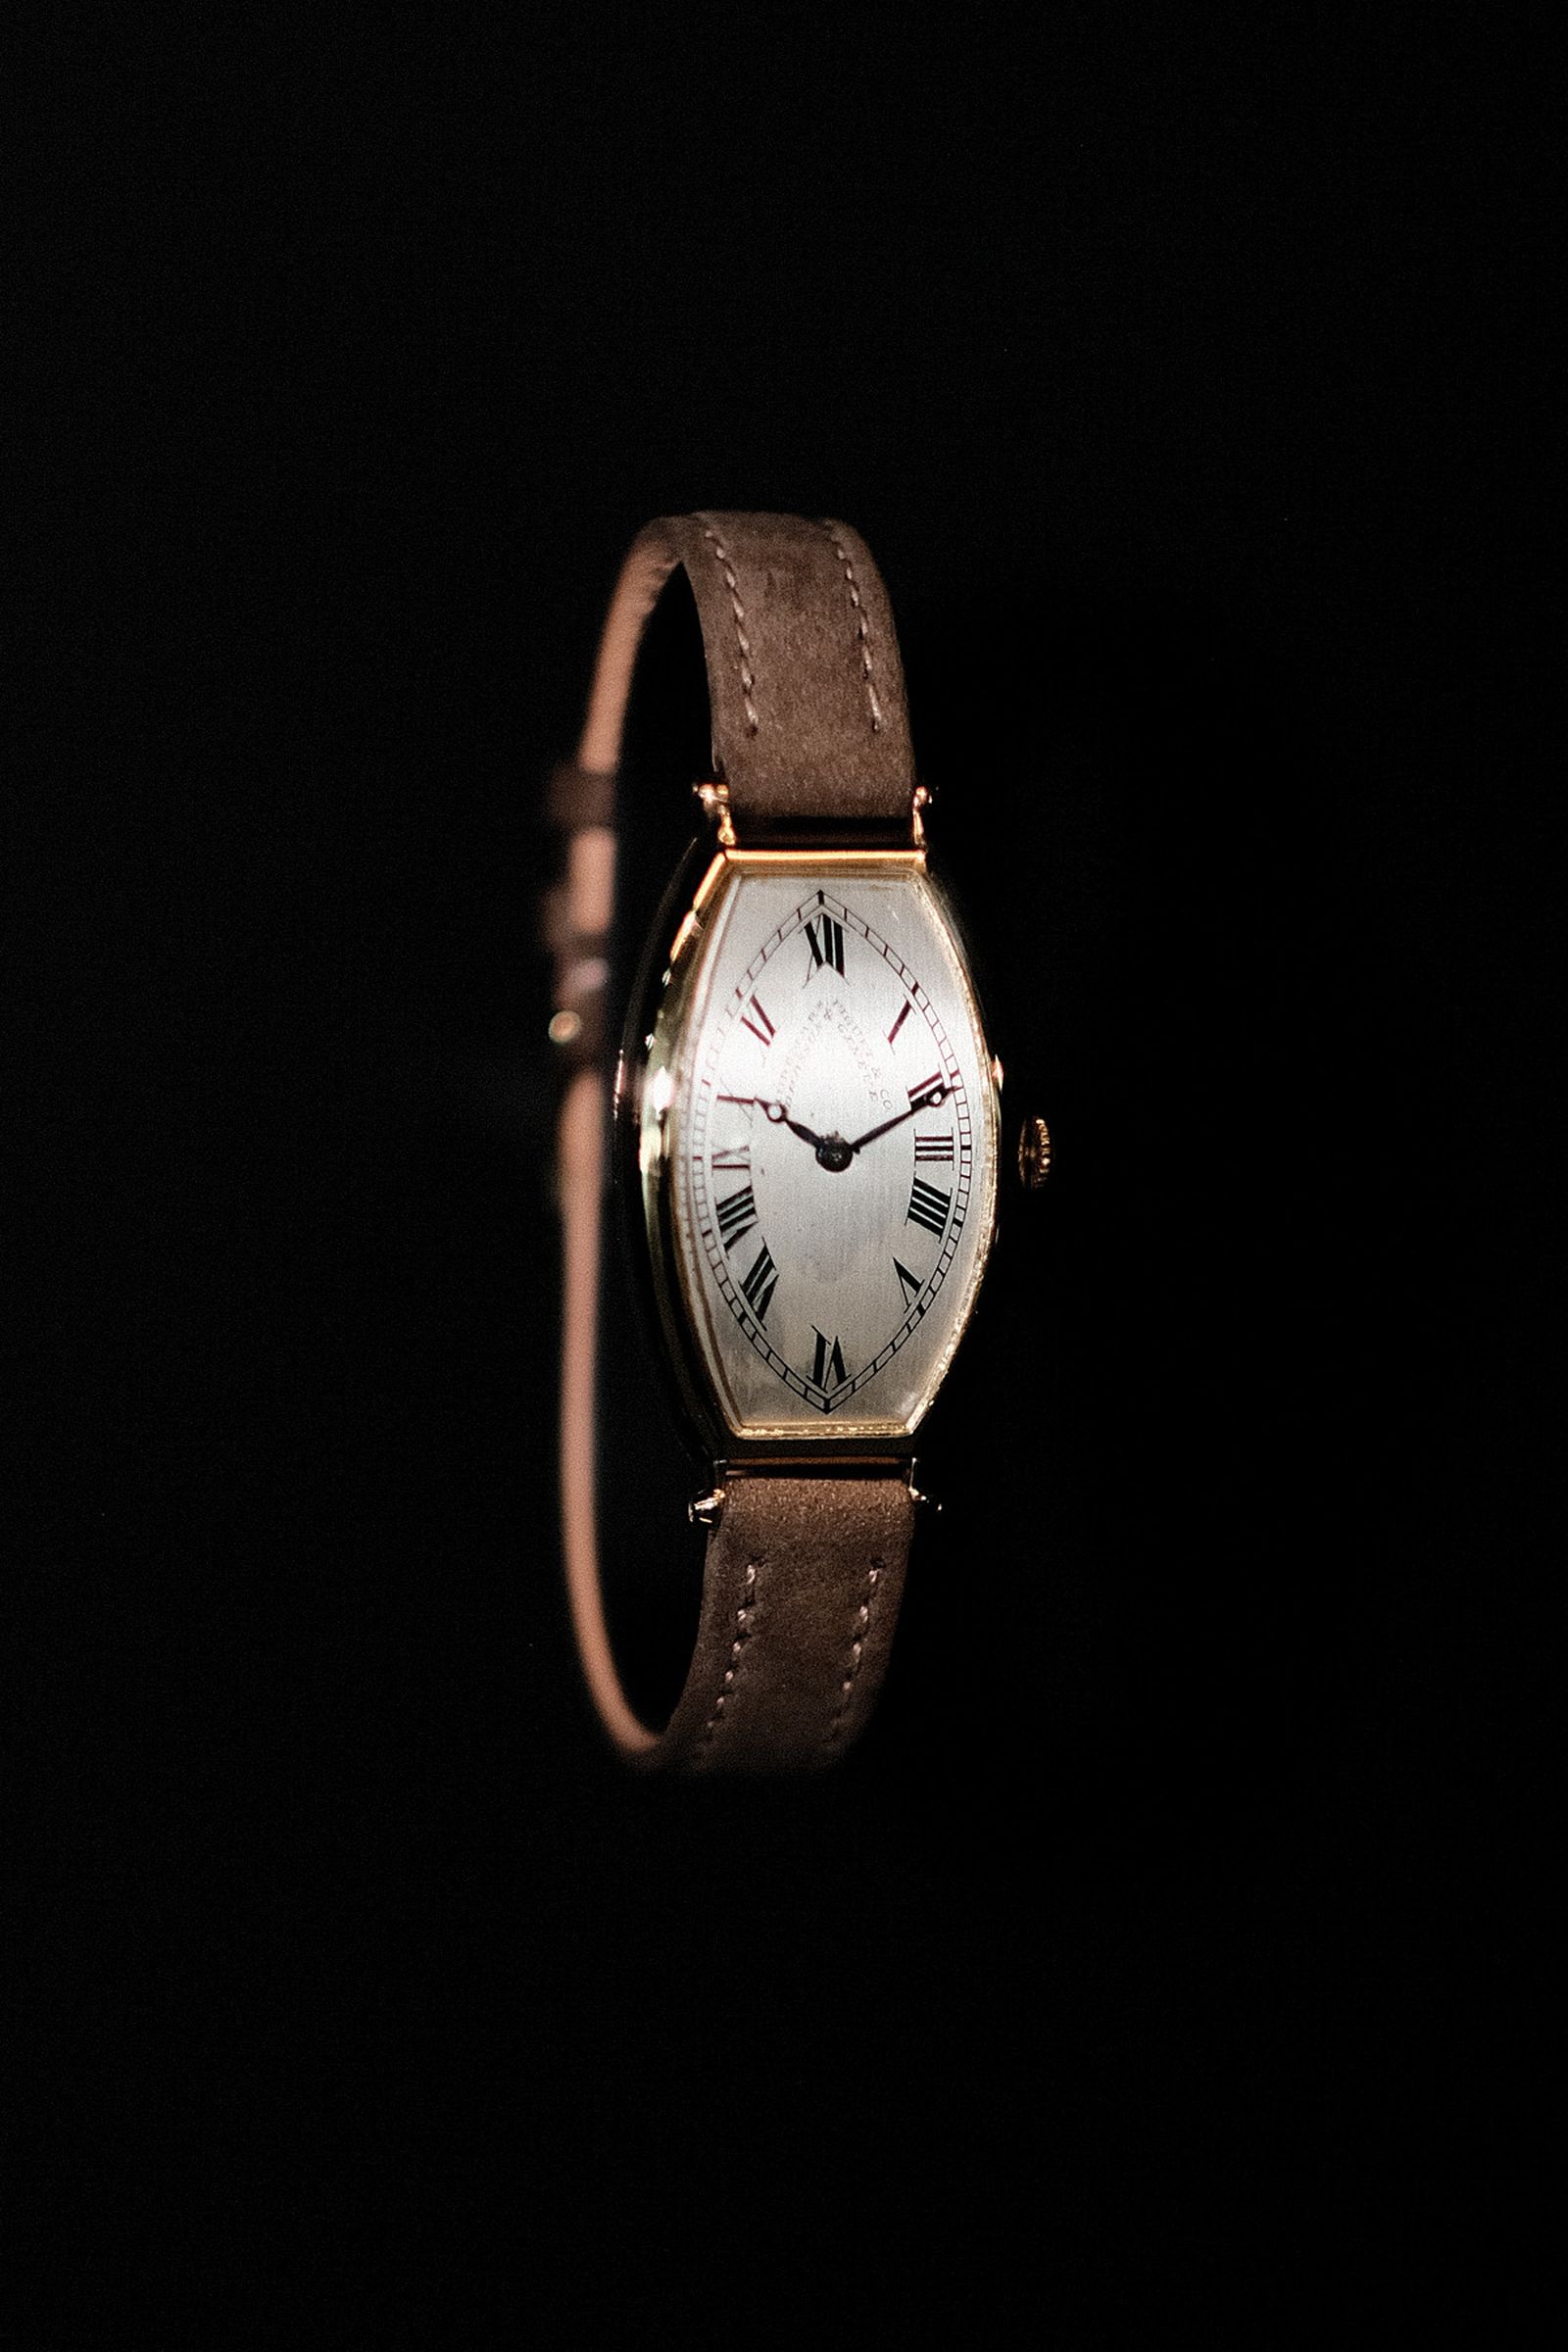 A look back at some historical AP watches in the museum.